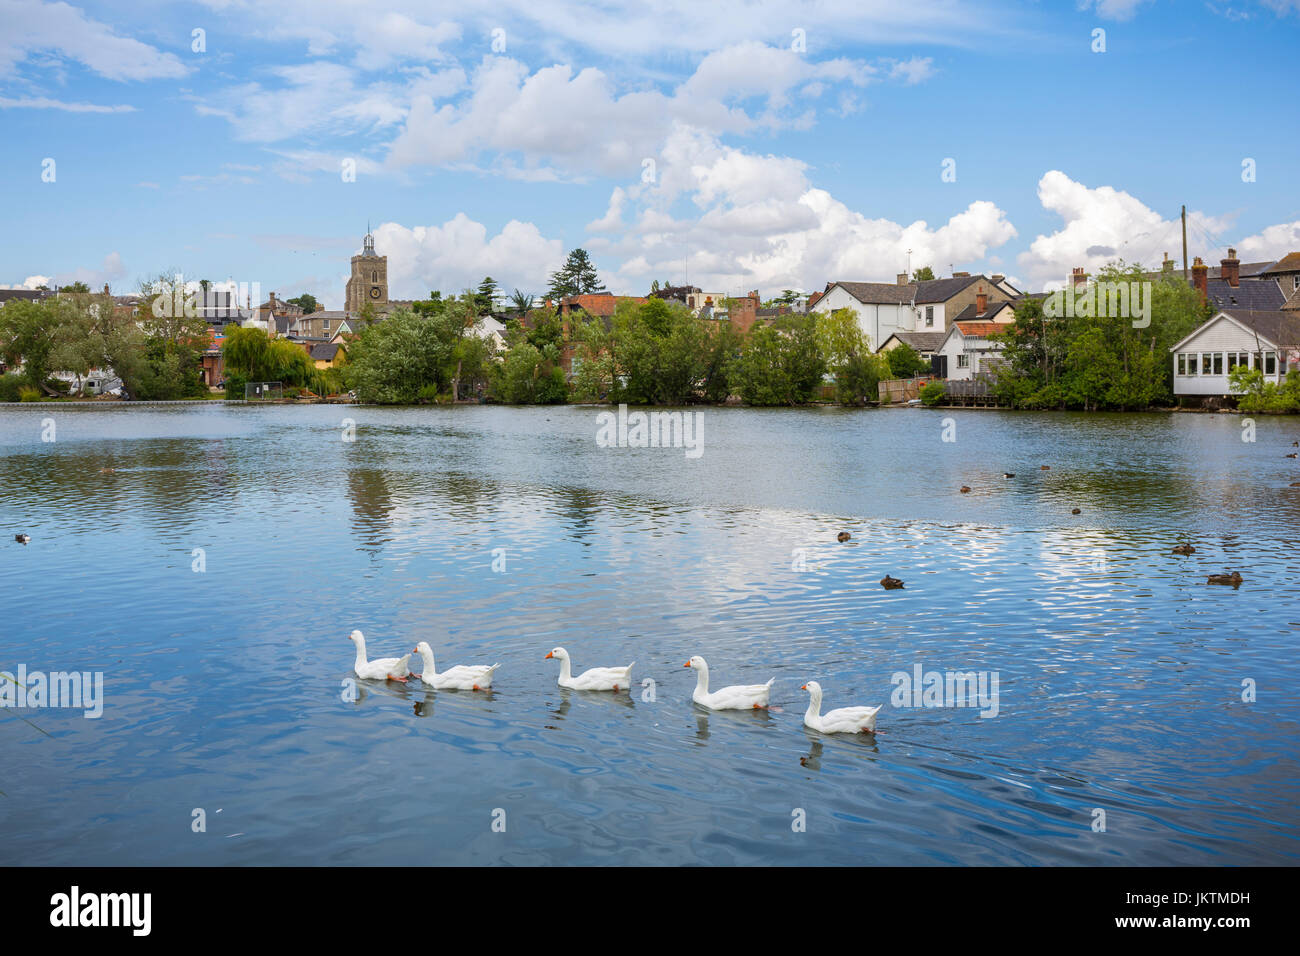 White geese on Diss mere, Diss, South Norfolk. Stock Photo